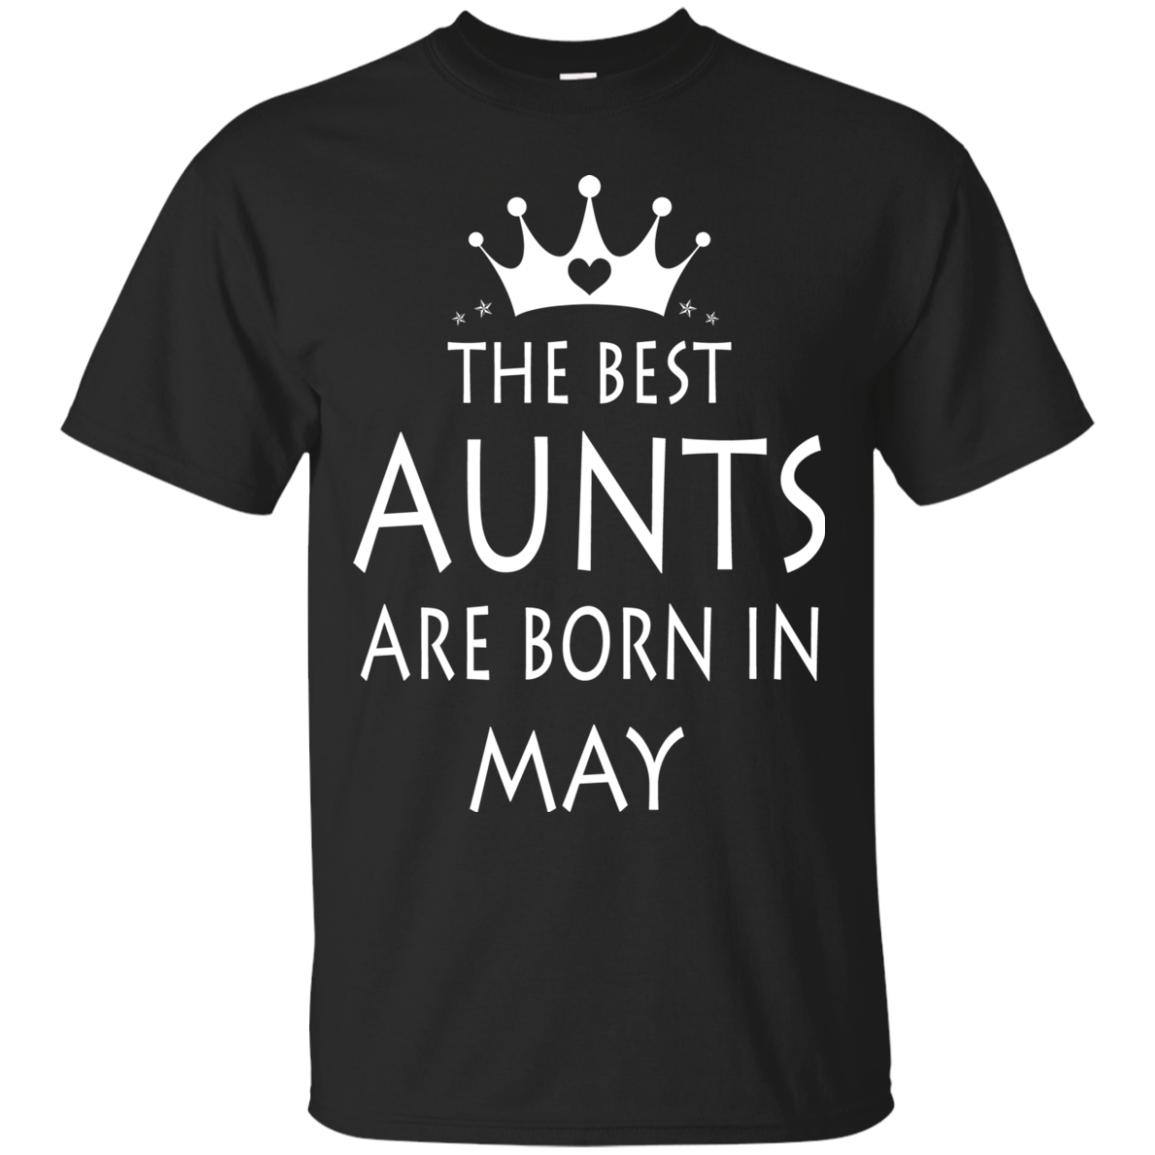 The best Aunts are born in May shirt, tank, sweater